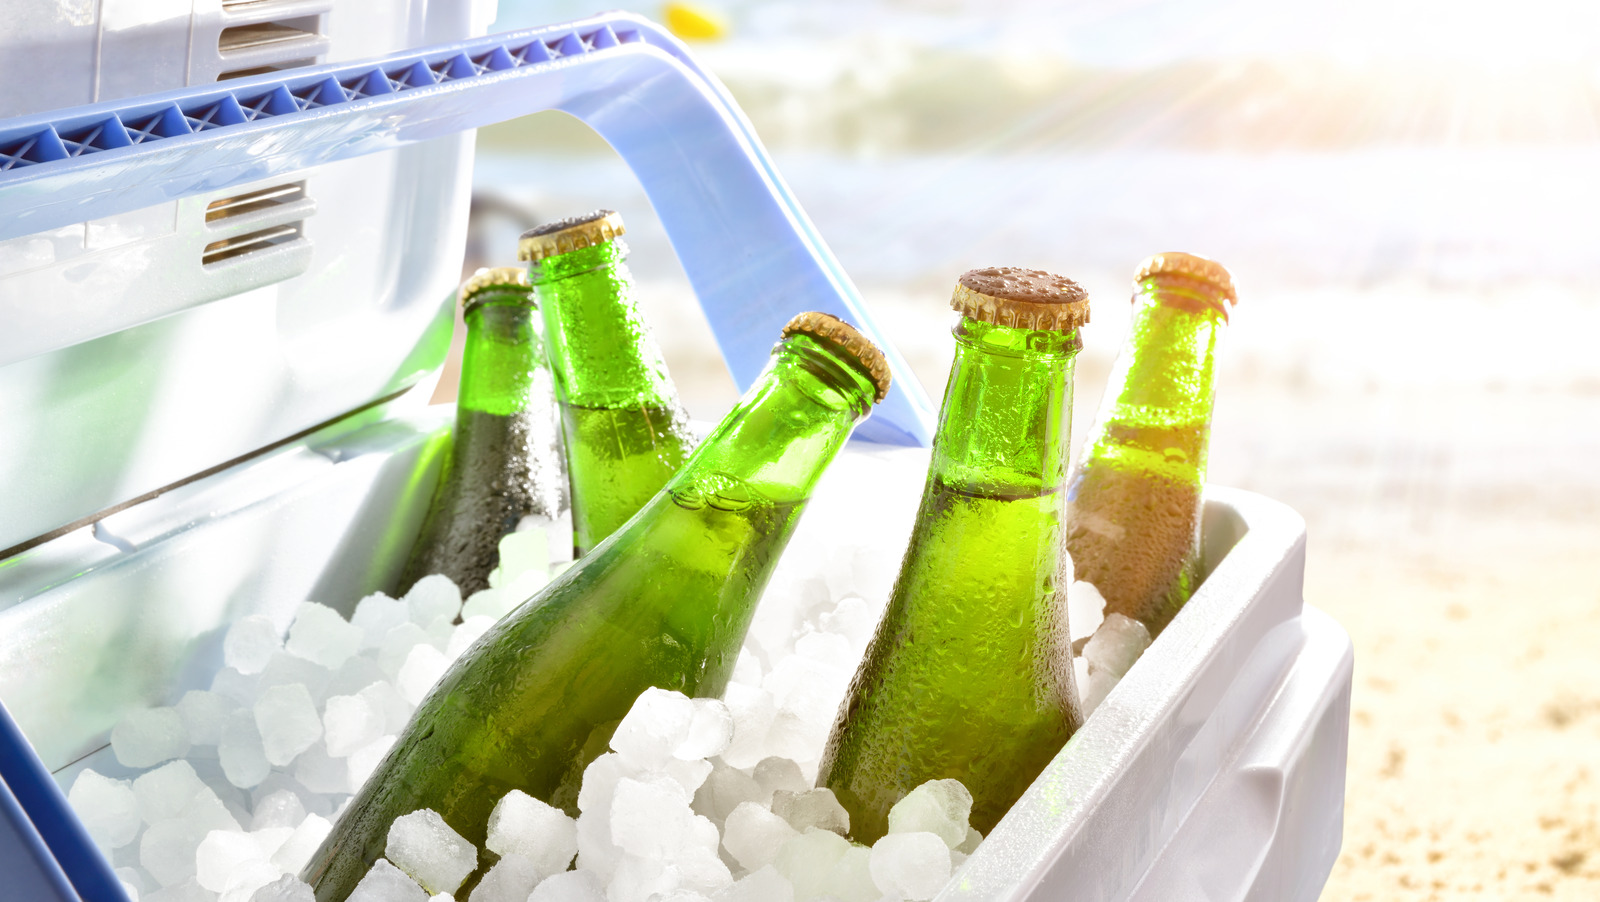 https://www.tastingtable.com/img/gallery/why-you-should-replace-cooler-ice-with-frozen-water-bottles/l-intro-1655230021.jpg